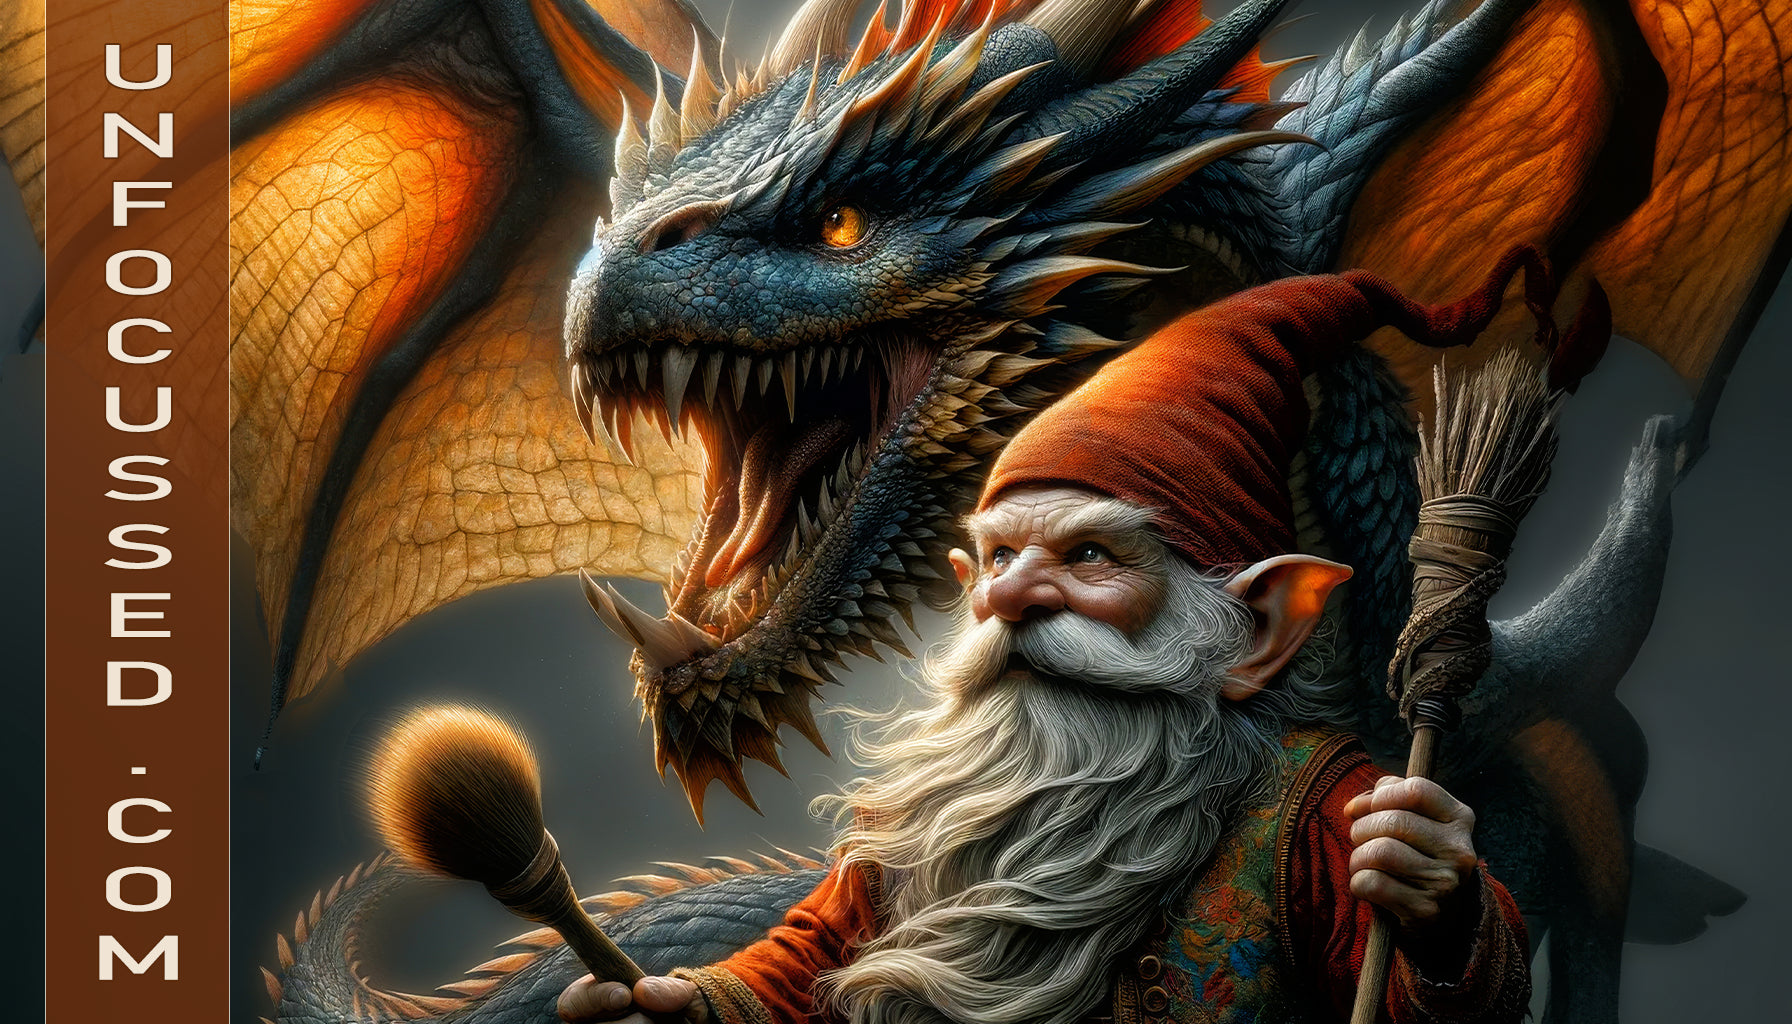 The Gnome's Dragon: A Mythical Bond – Unfocussed Photography & Art